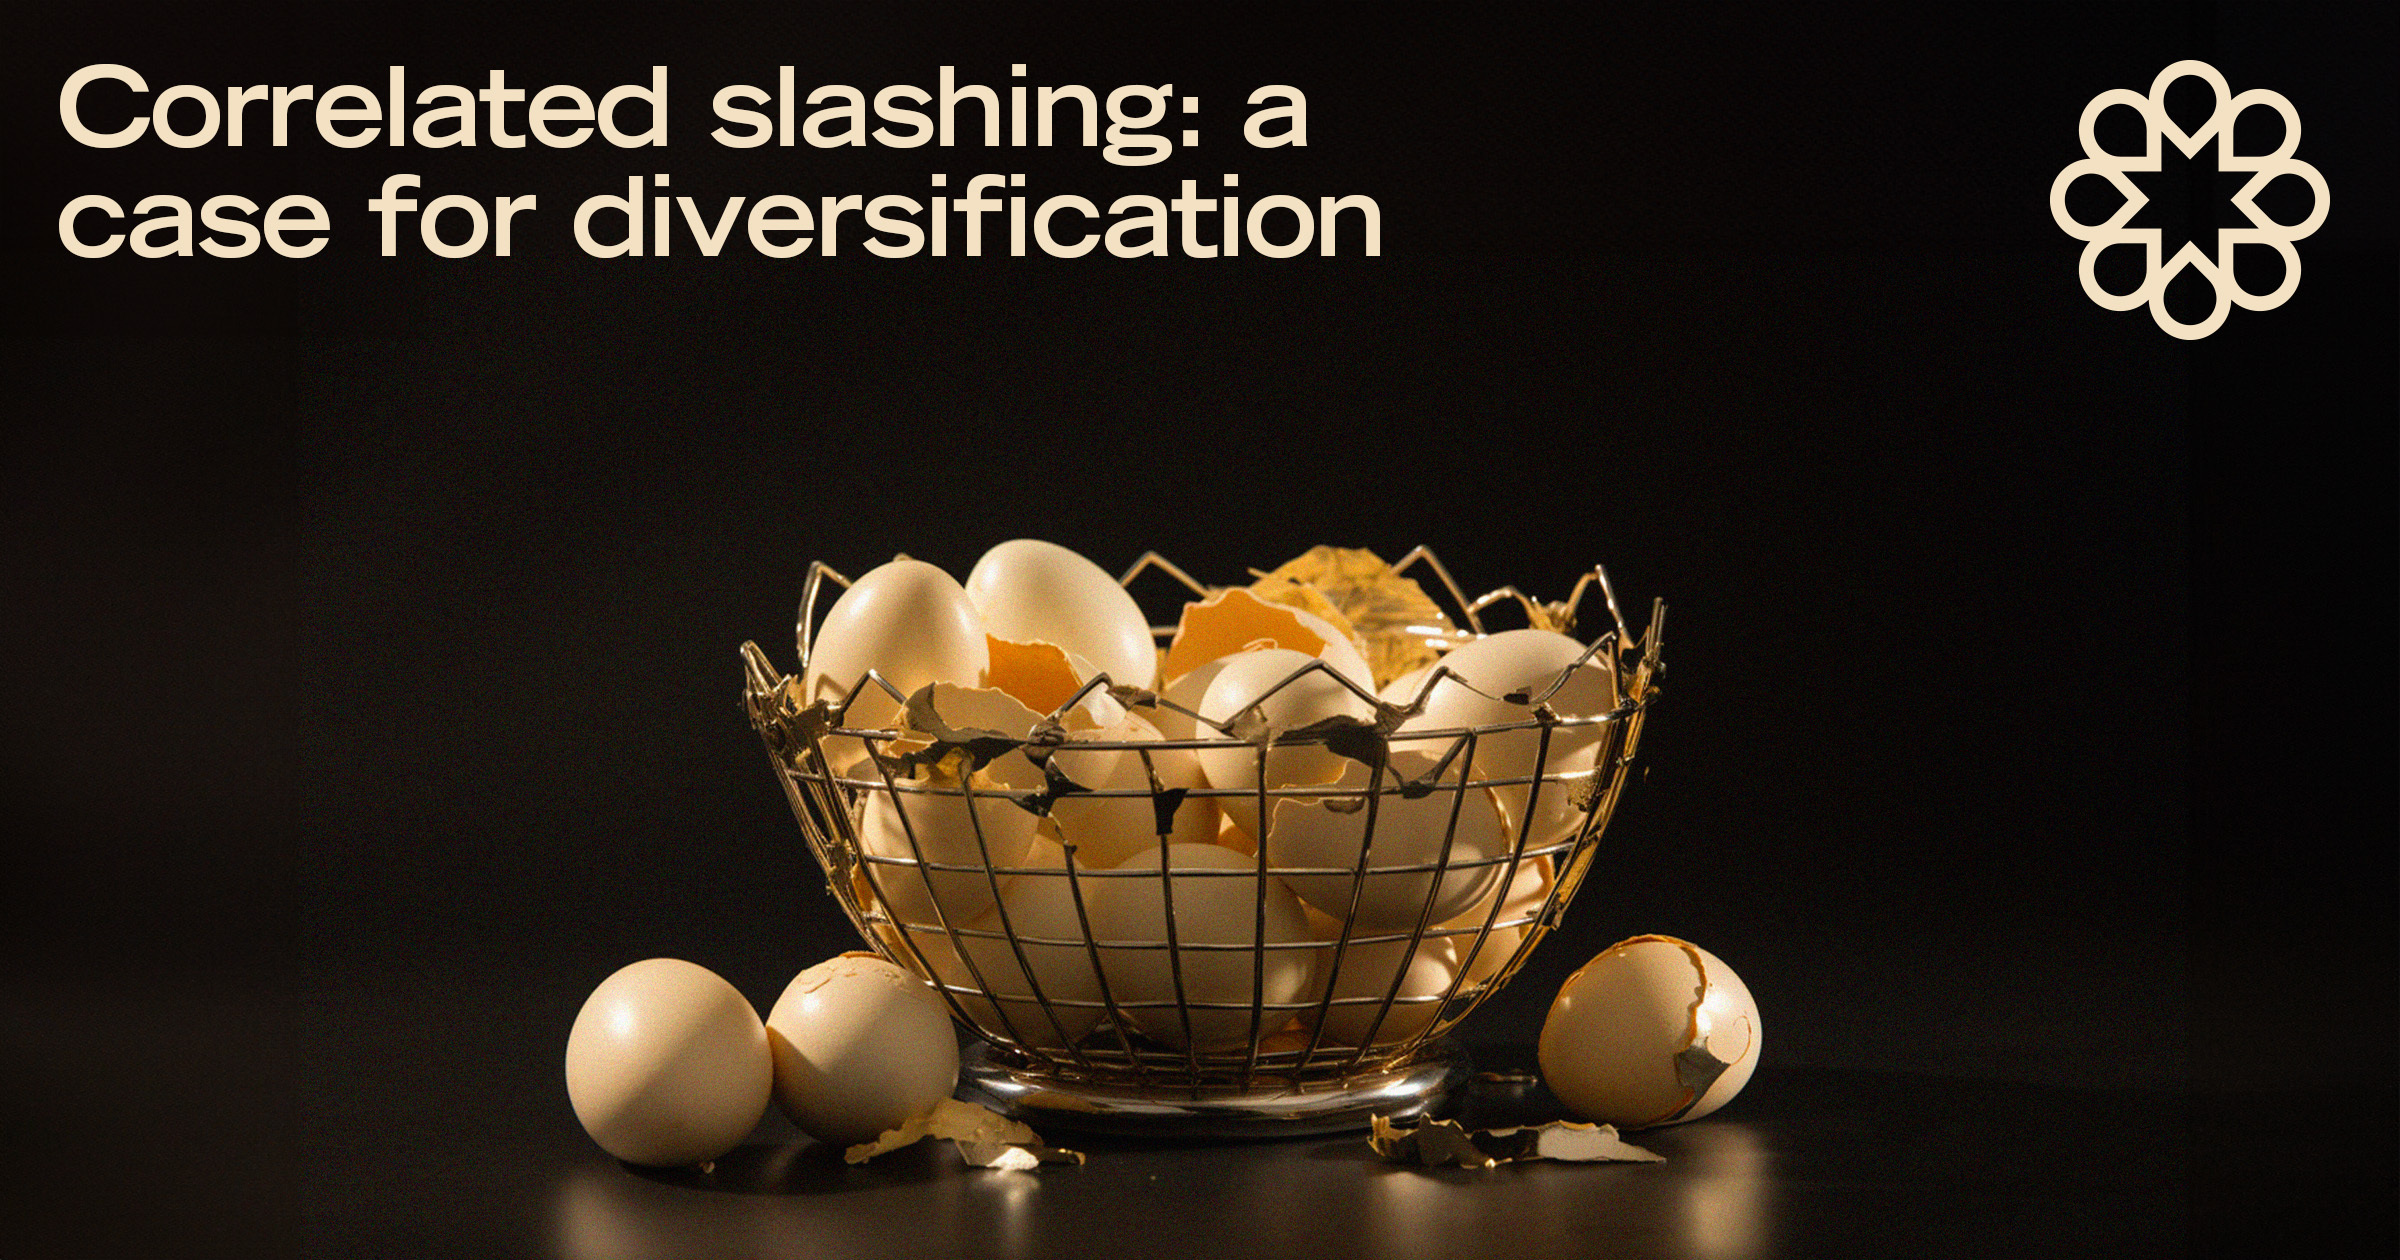 Correlated slashing: a case for diversification